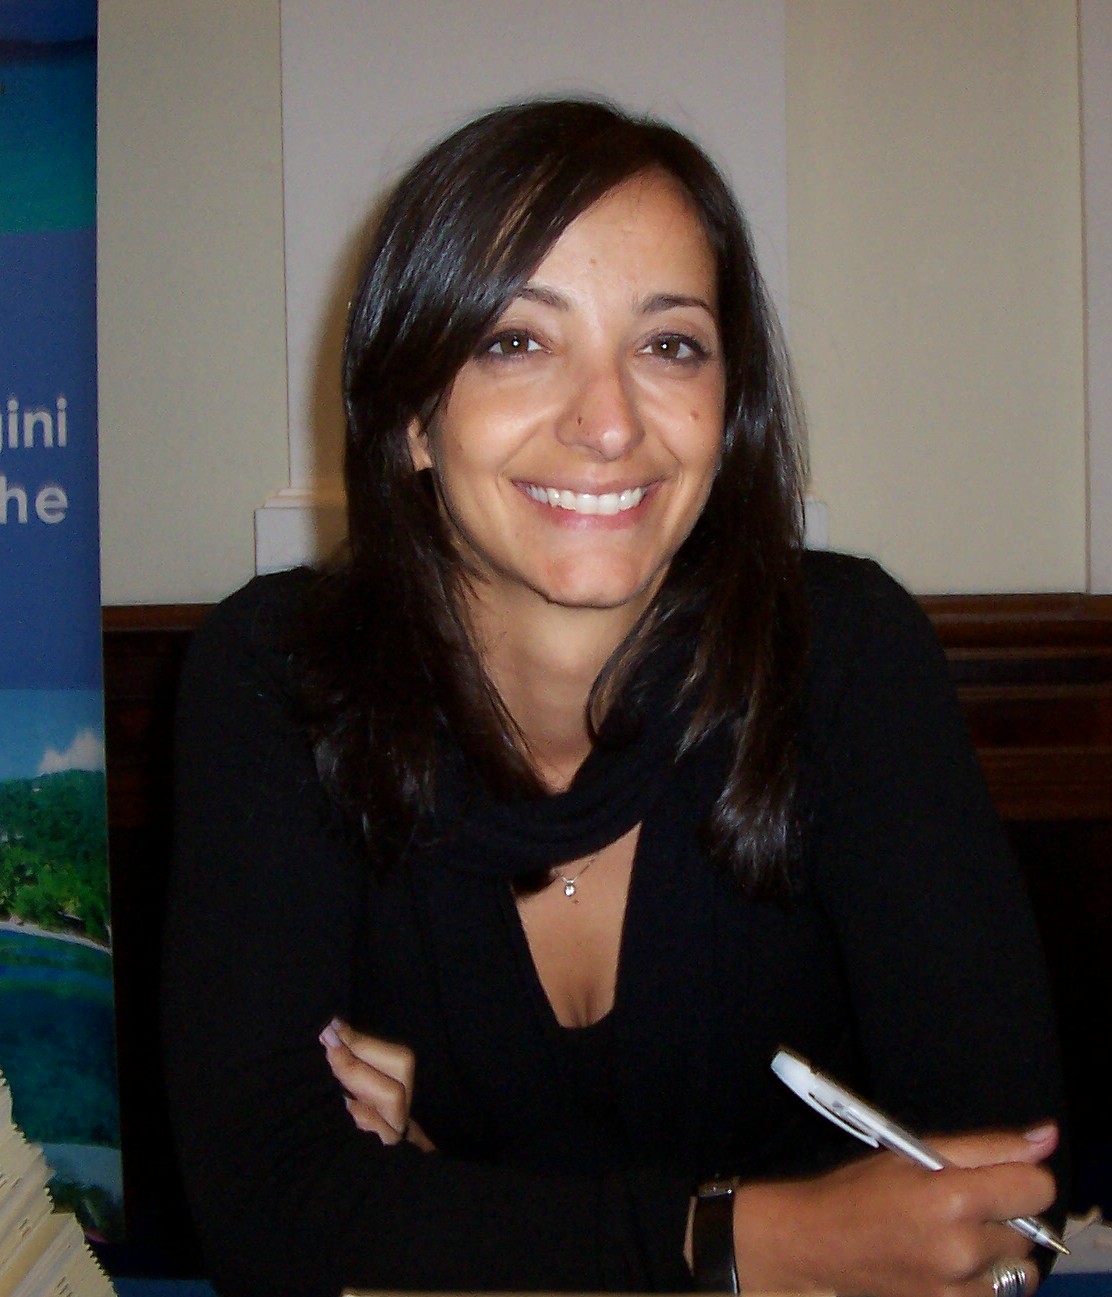 Abu Dhabi tourism & culture authority: Dora Paradies è il nuovo country manager Italy